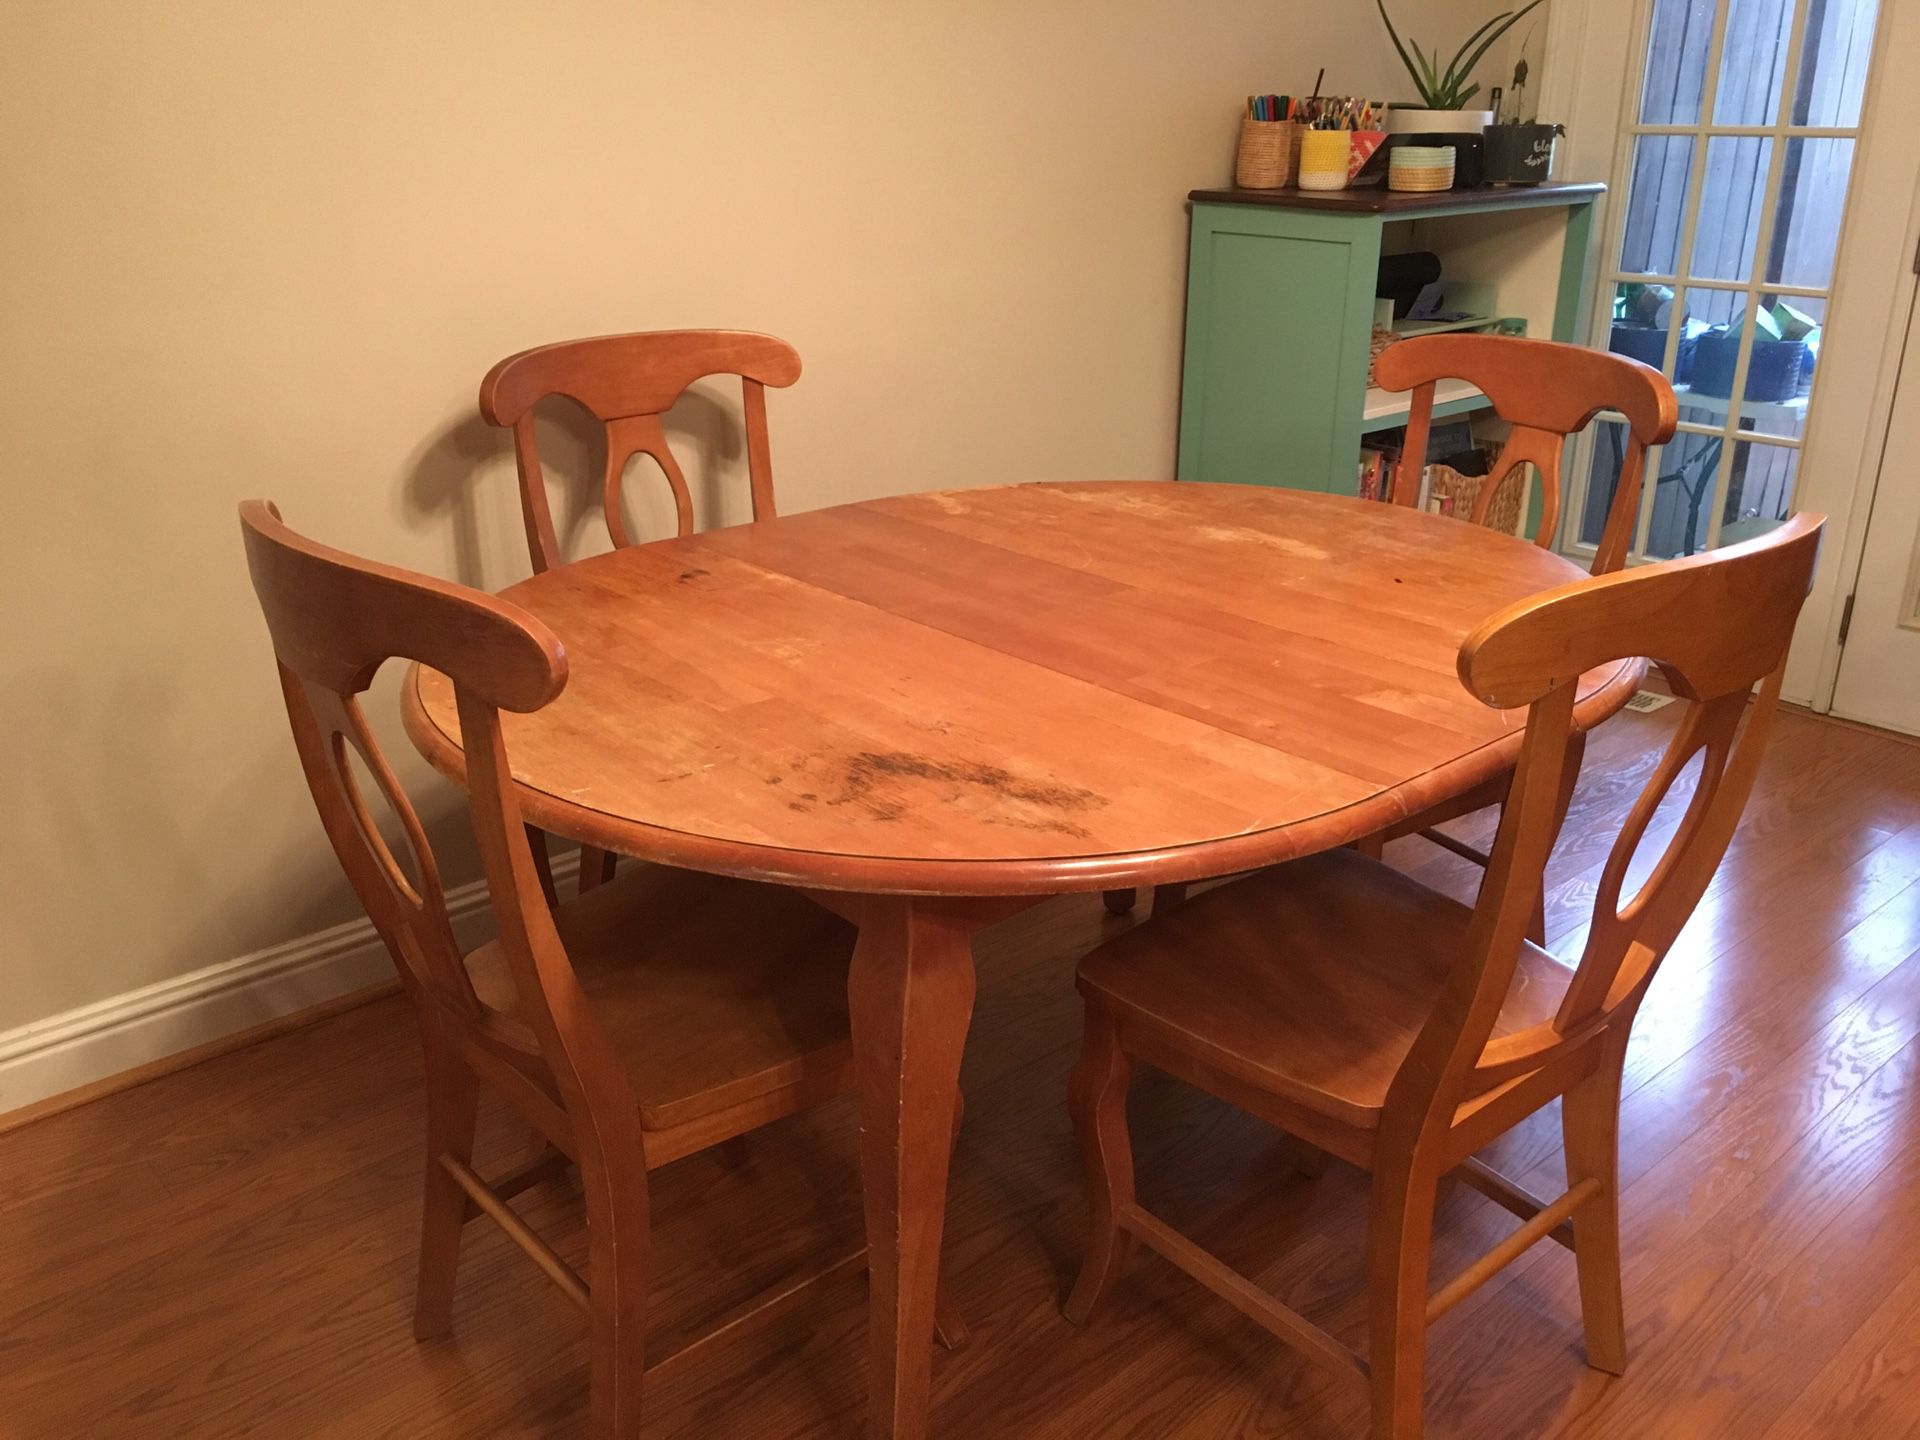 Wooden Table w/ 6 Chairs